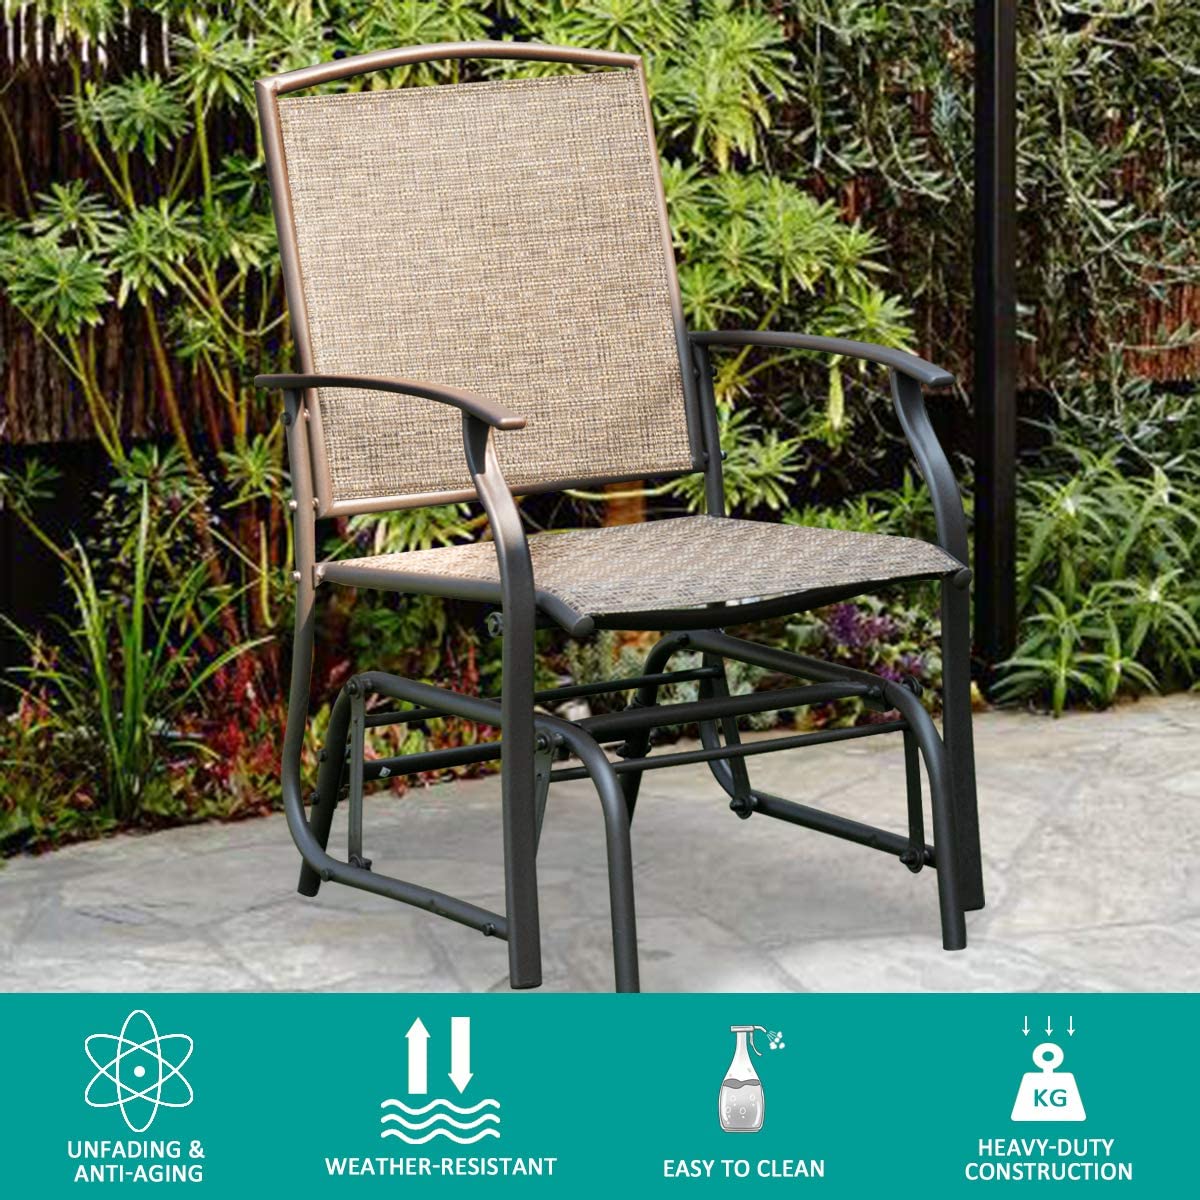 Outdoor Glider Chair W/Sturdy Metal Frame & Breathable Mesh Fabric, Porch Lounge Swing Rocking Chair for Lawn, Garden, Porch, Backyard, Poolside, Patio Glider - image 3 of 9